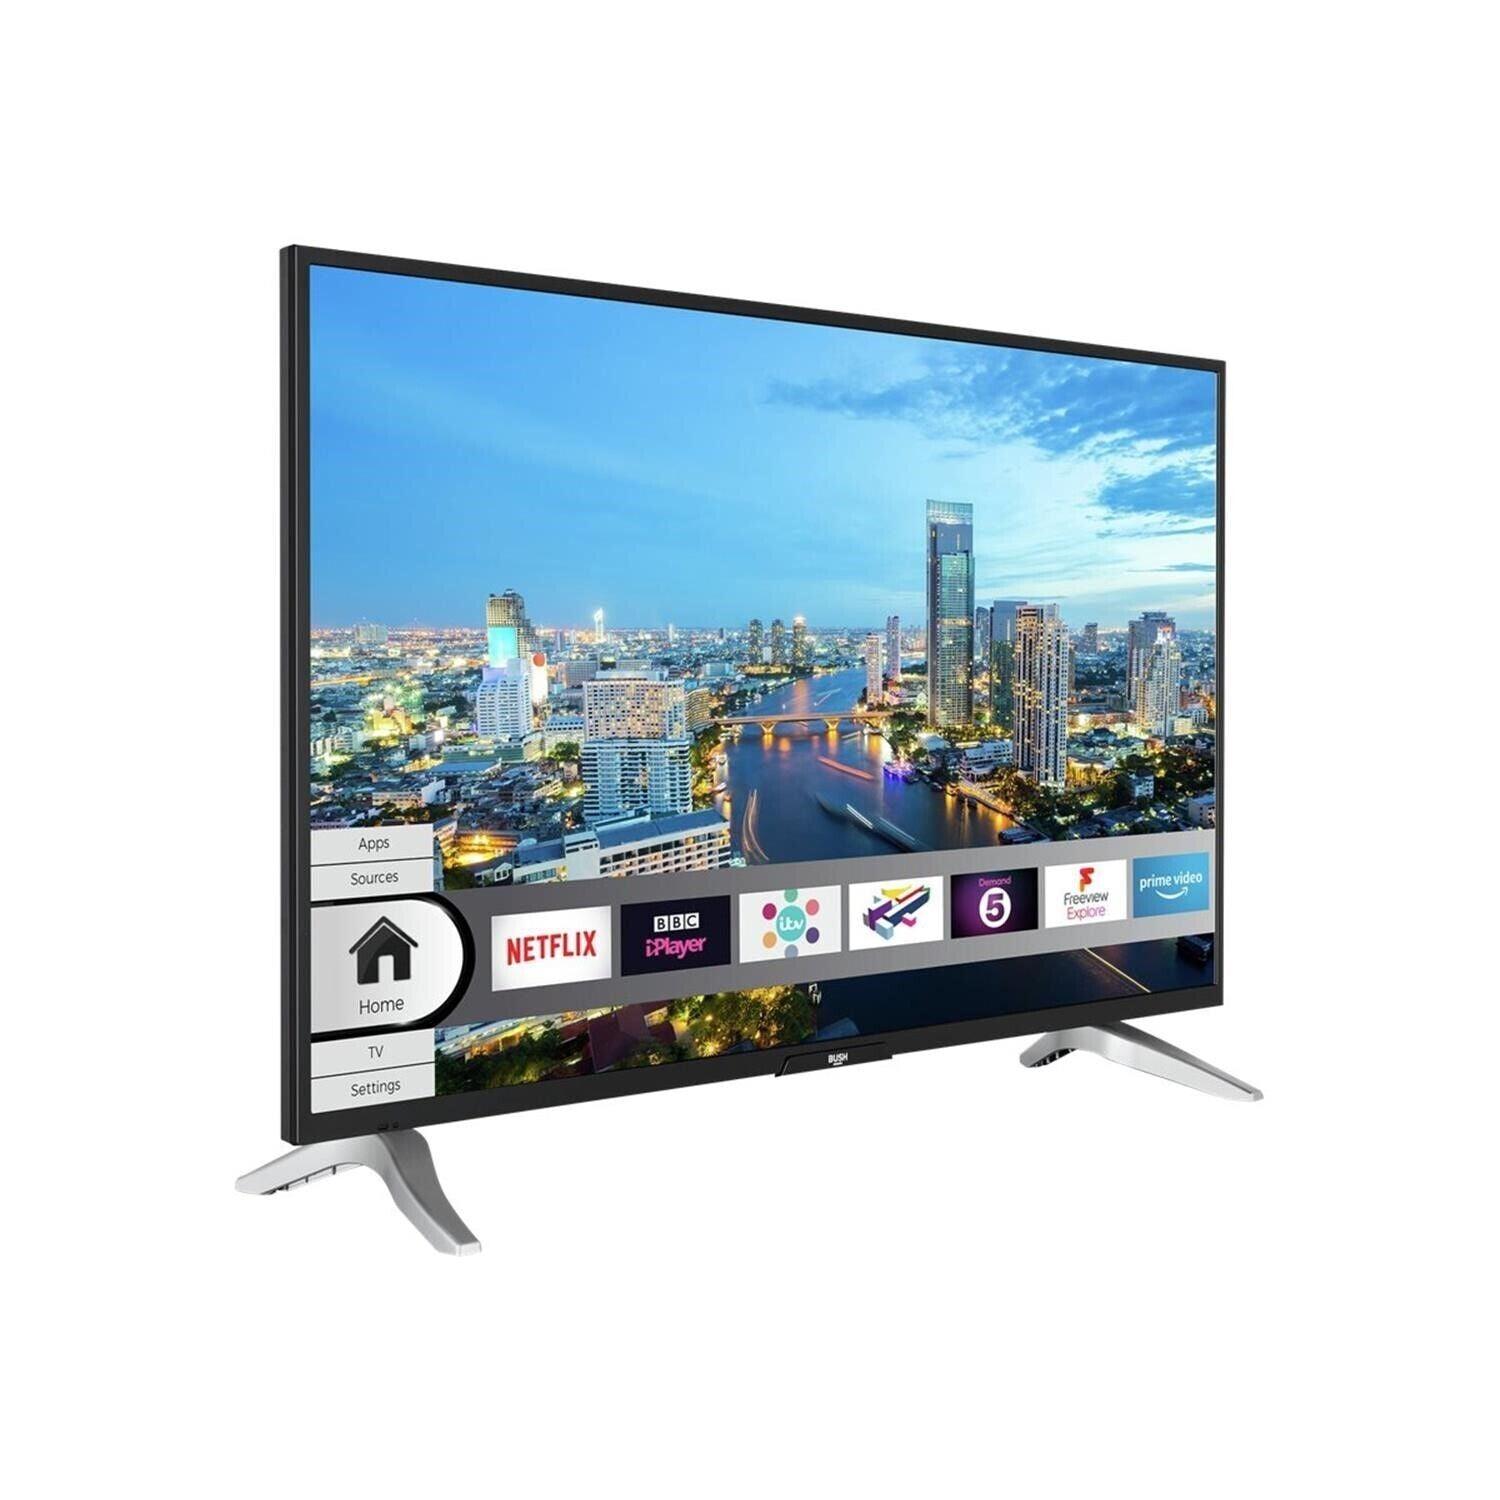 Bush 43 Inch Smart 4K UHD HDR LED Freeview TV COLLECTION ONLY U - Smart Clear Vision